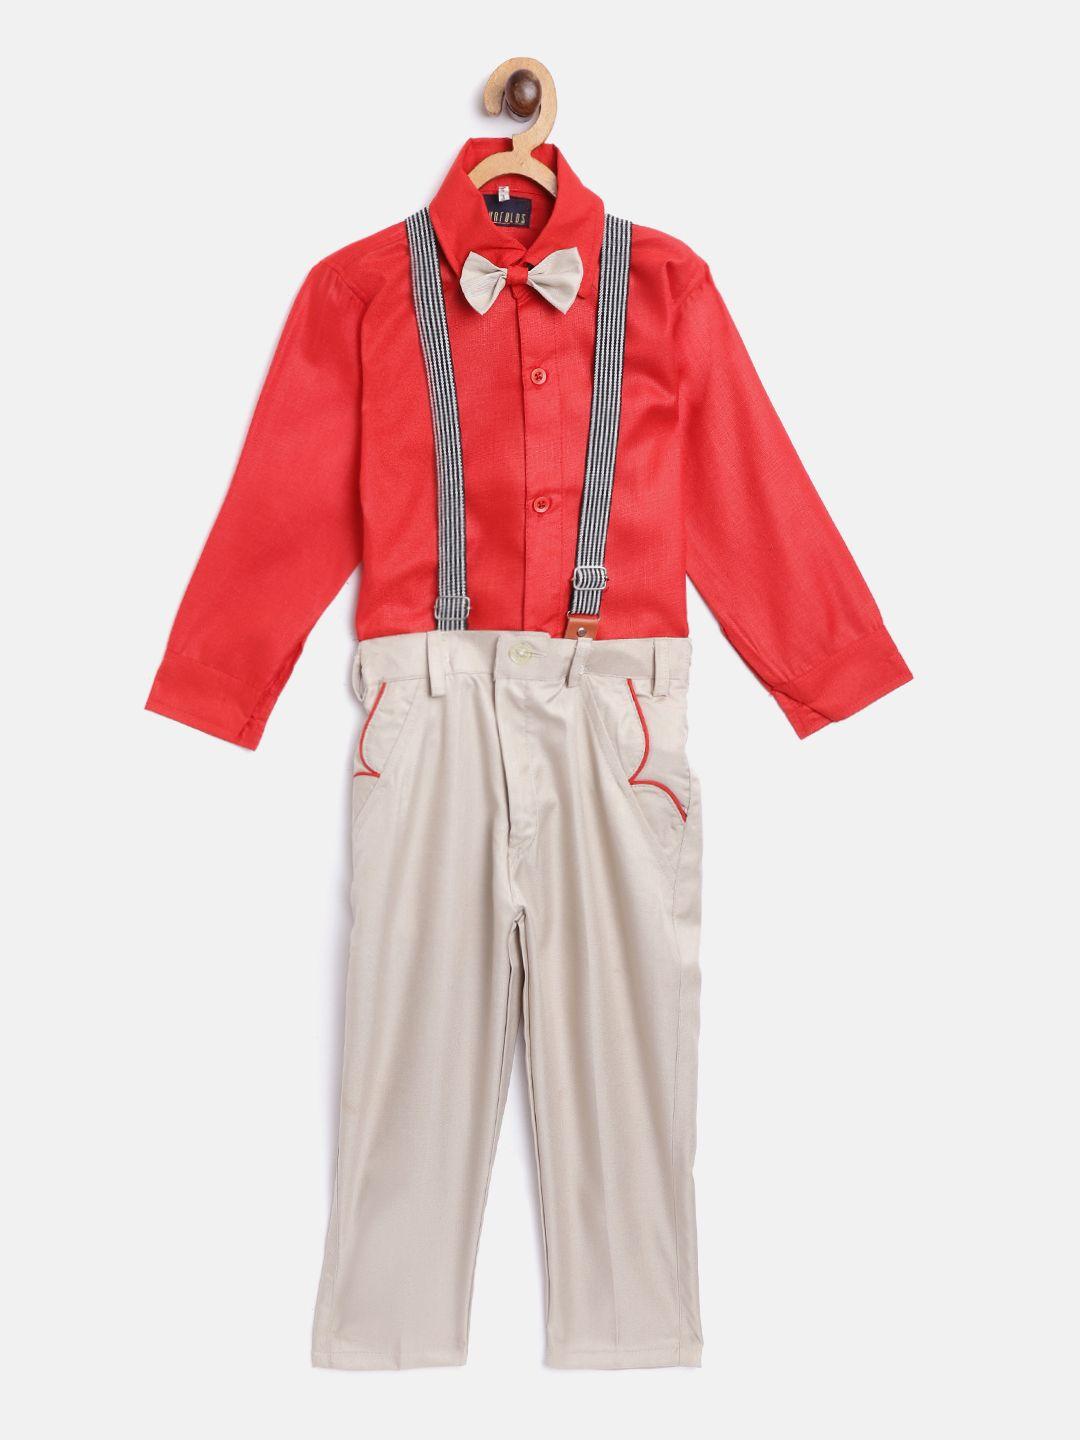 fourfolds-boys-red-&-beige-solid-clothing-set-with-suspenders-&-bow-tie